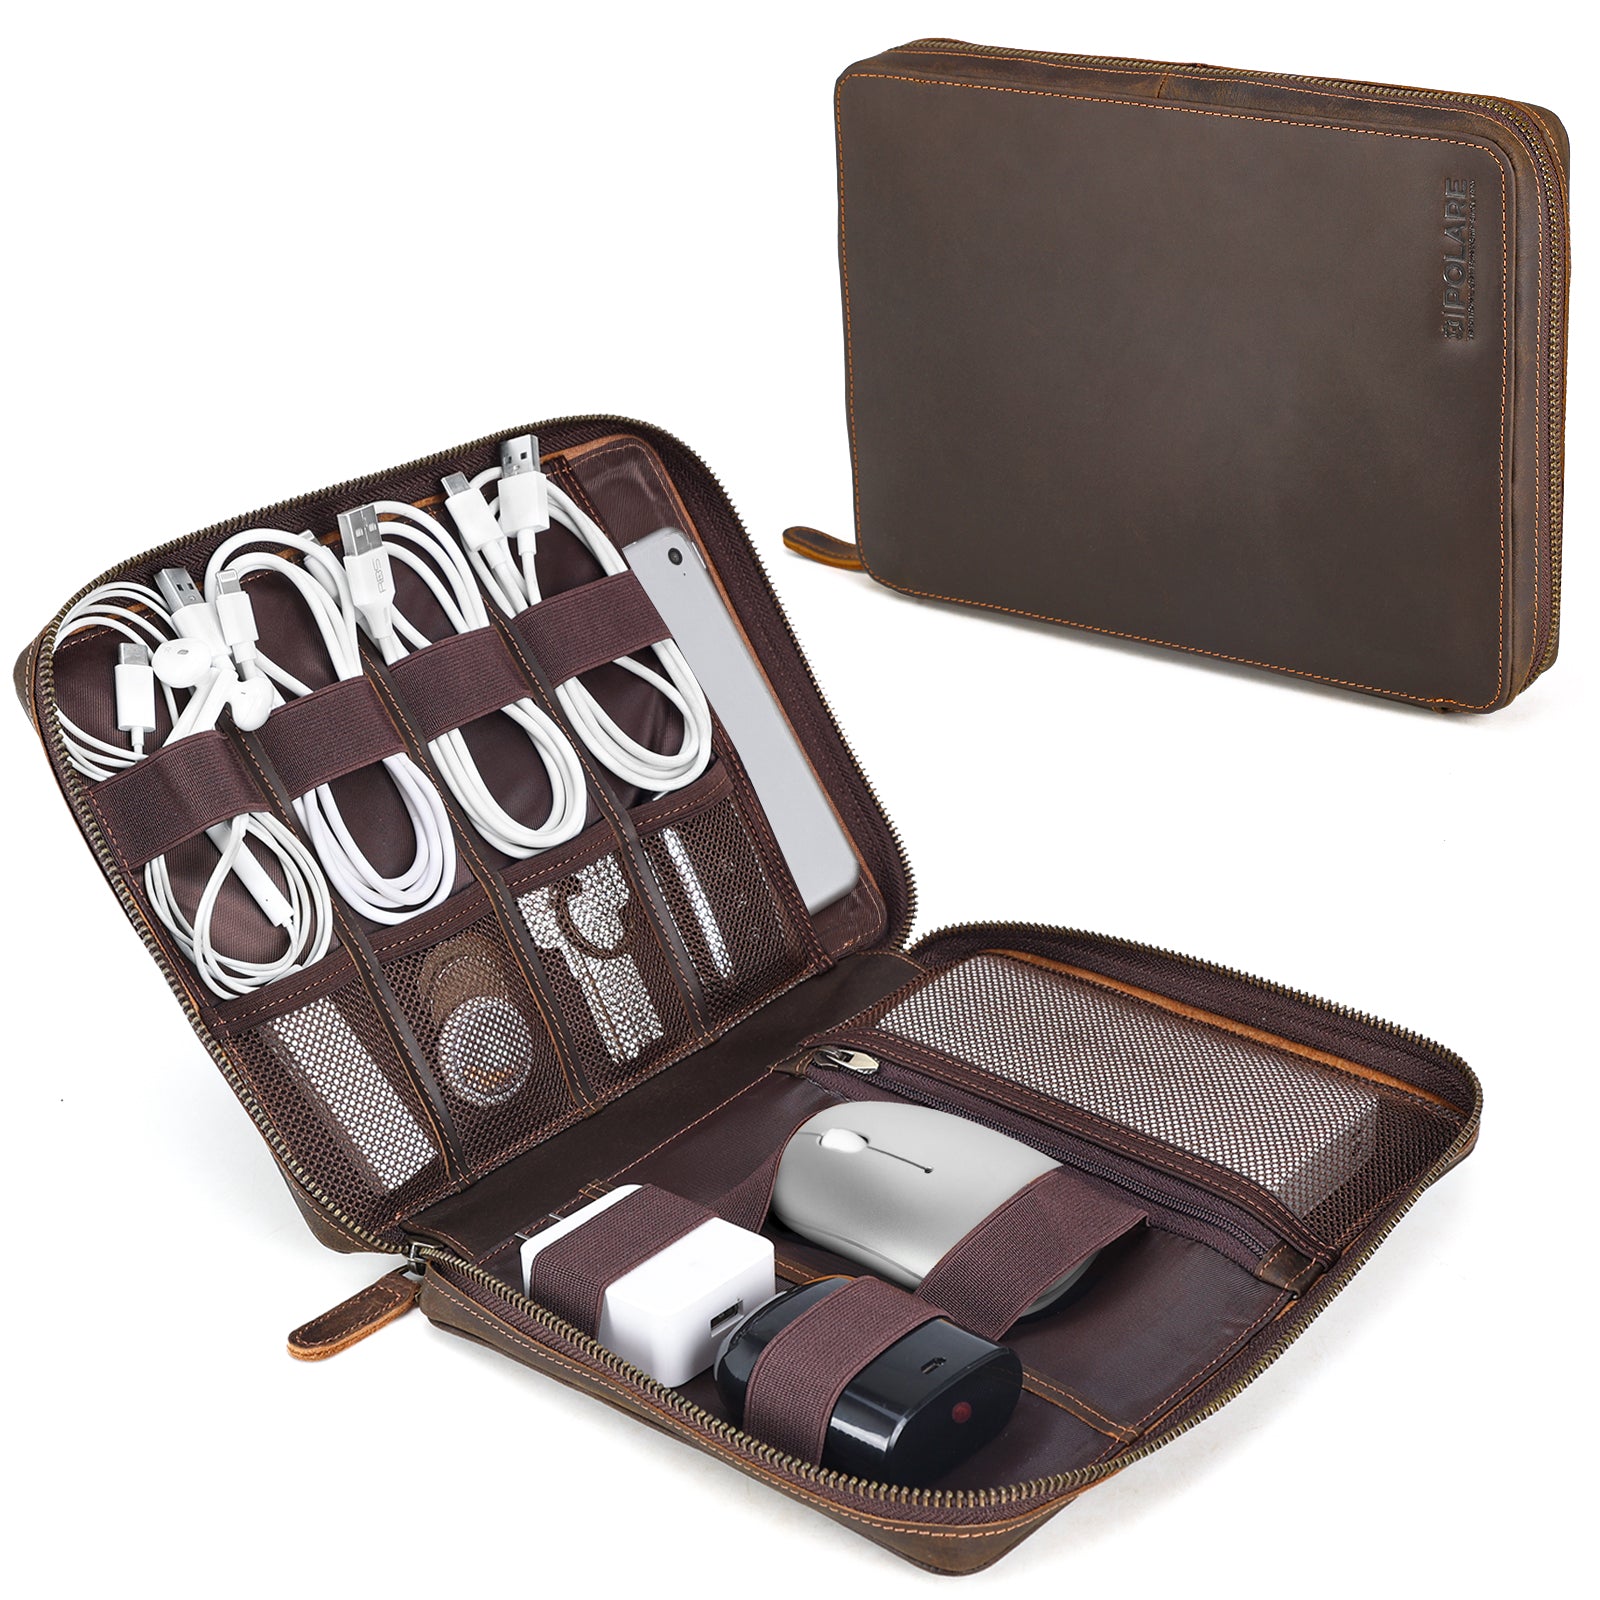 Leather Travel Cable Organizer Case Electronics Accessories Storage Bag